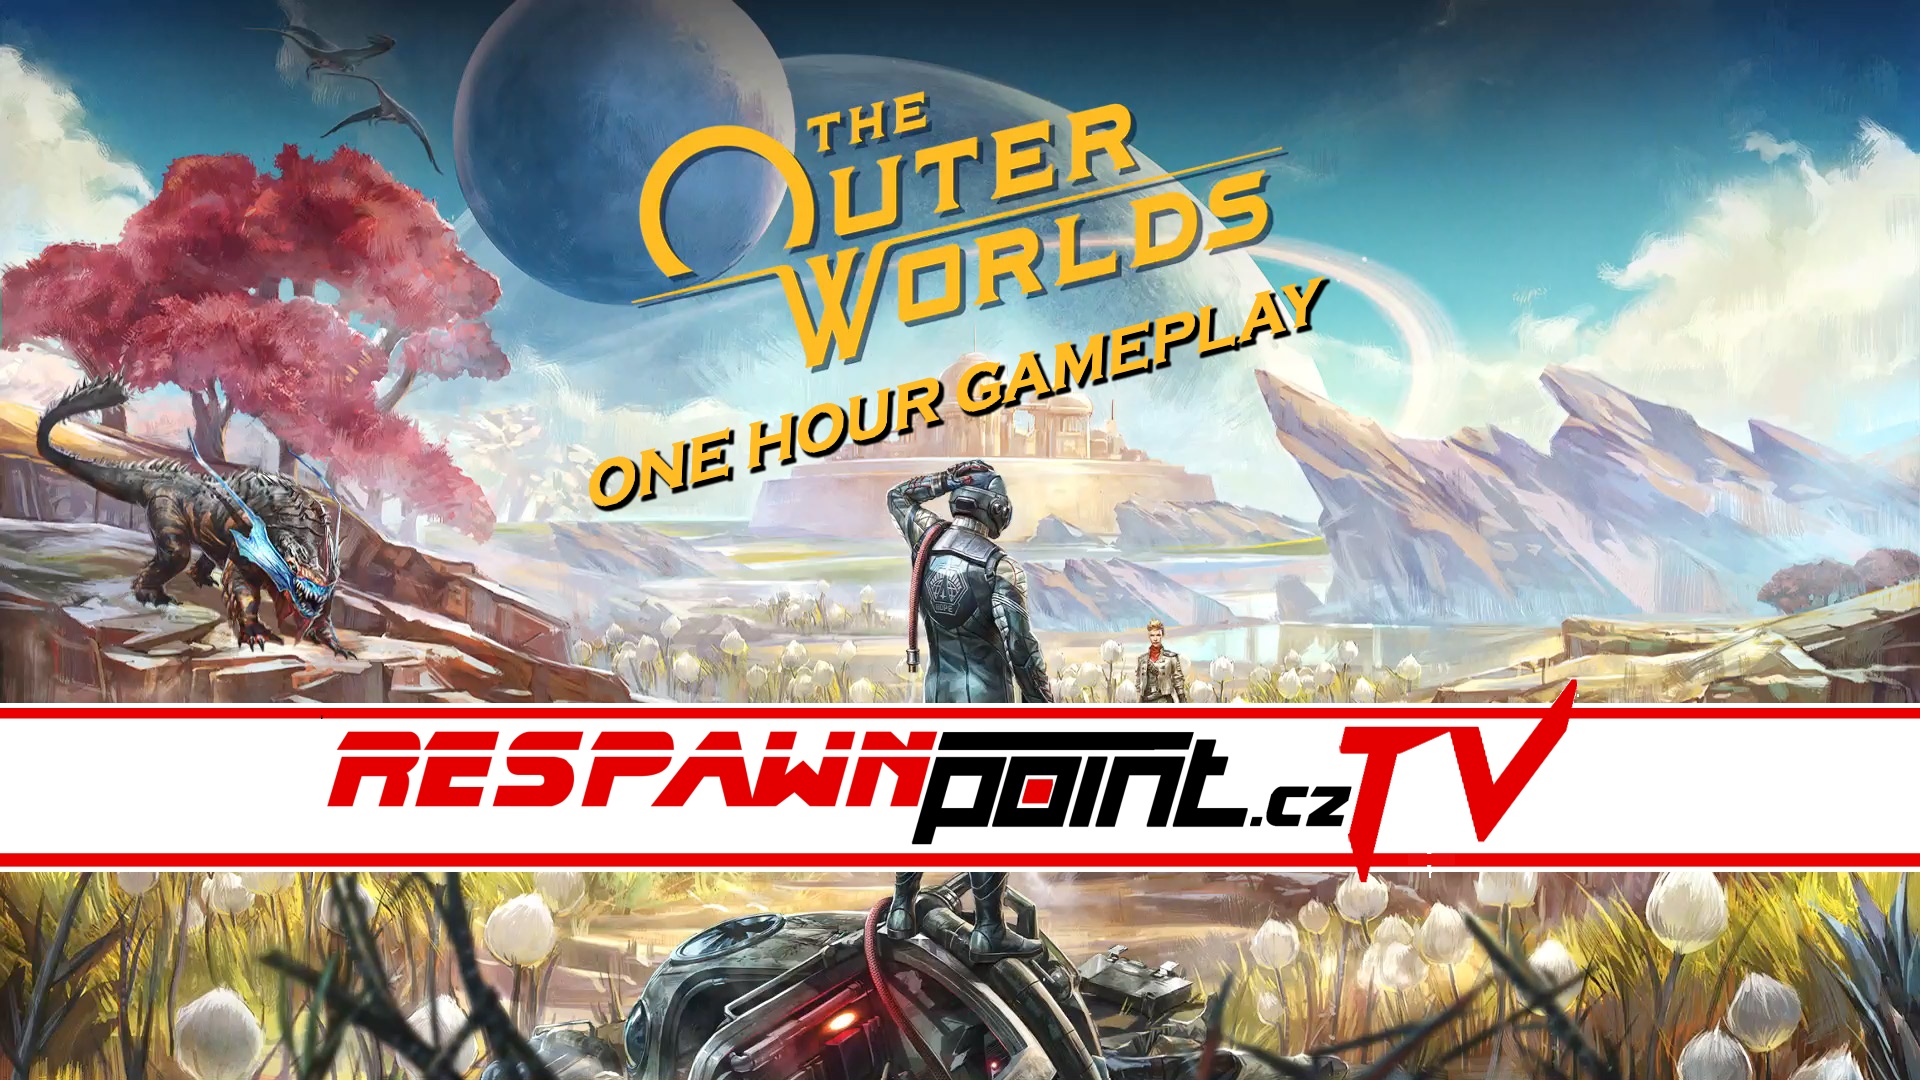 The Outer Worlds – One Hour Gameplay